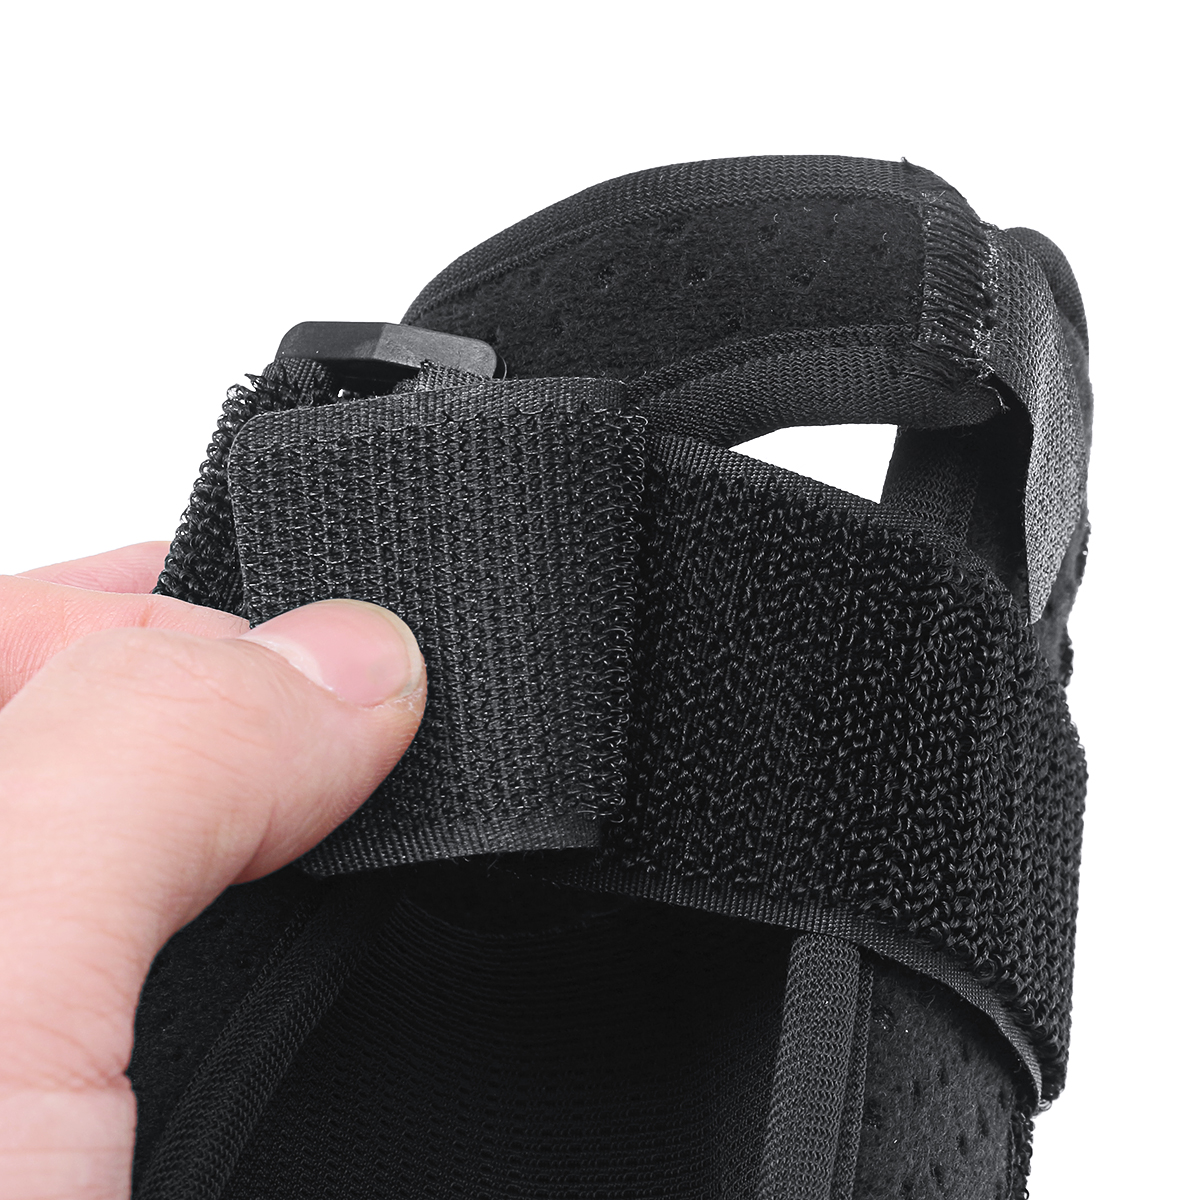 Breathable-Adjustable-Wrist-Support-Wrist-Brace-Wrist-Joint-Fixation-Sprain-Protector-Medical-Protec-1571406-5